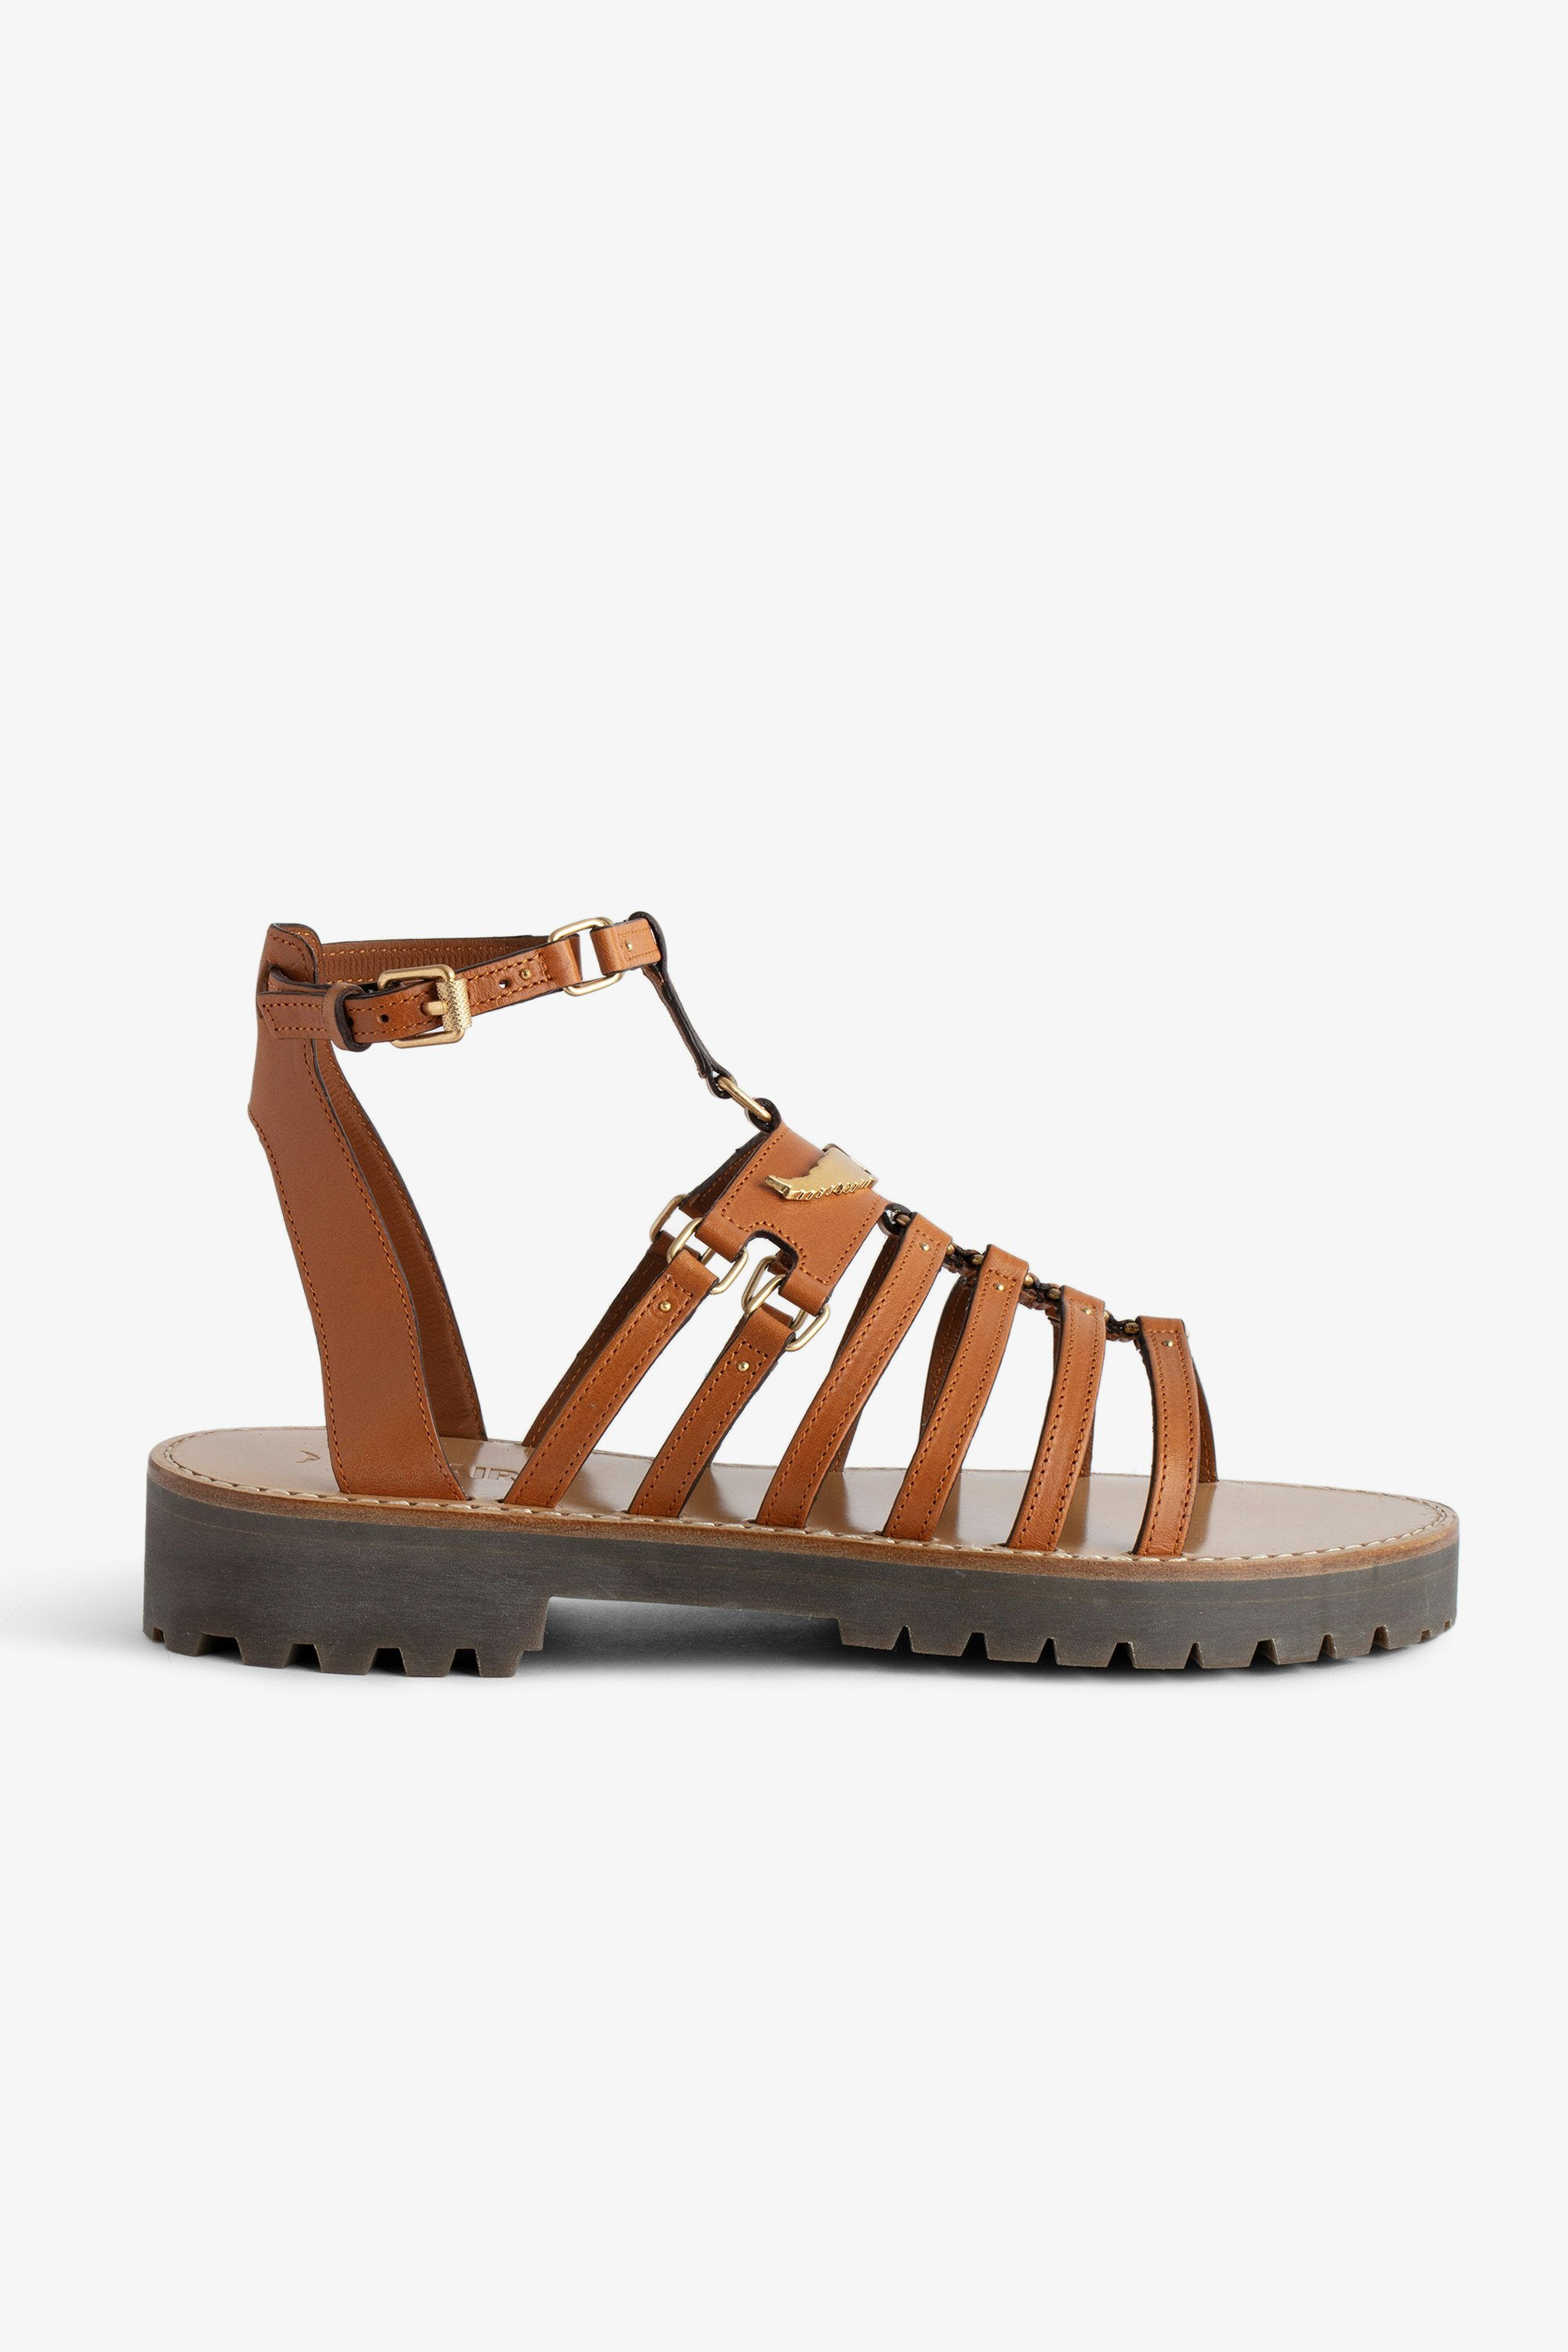 Joe Sandals - Brown vegetable-tanned leather sandals with straps, adjustable buckle and wings charm.